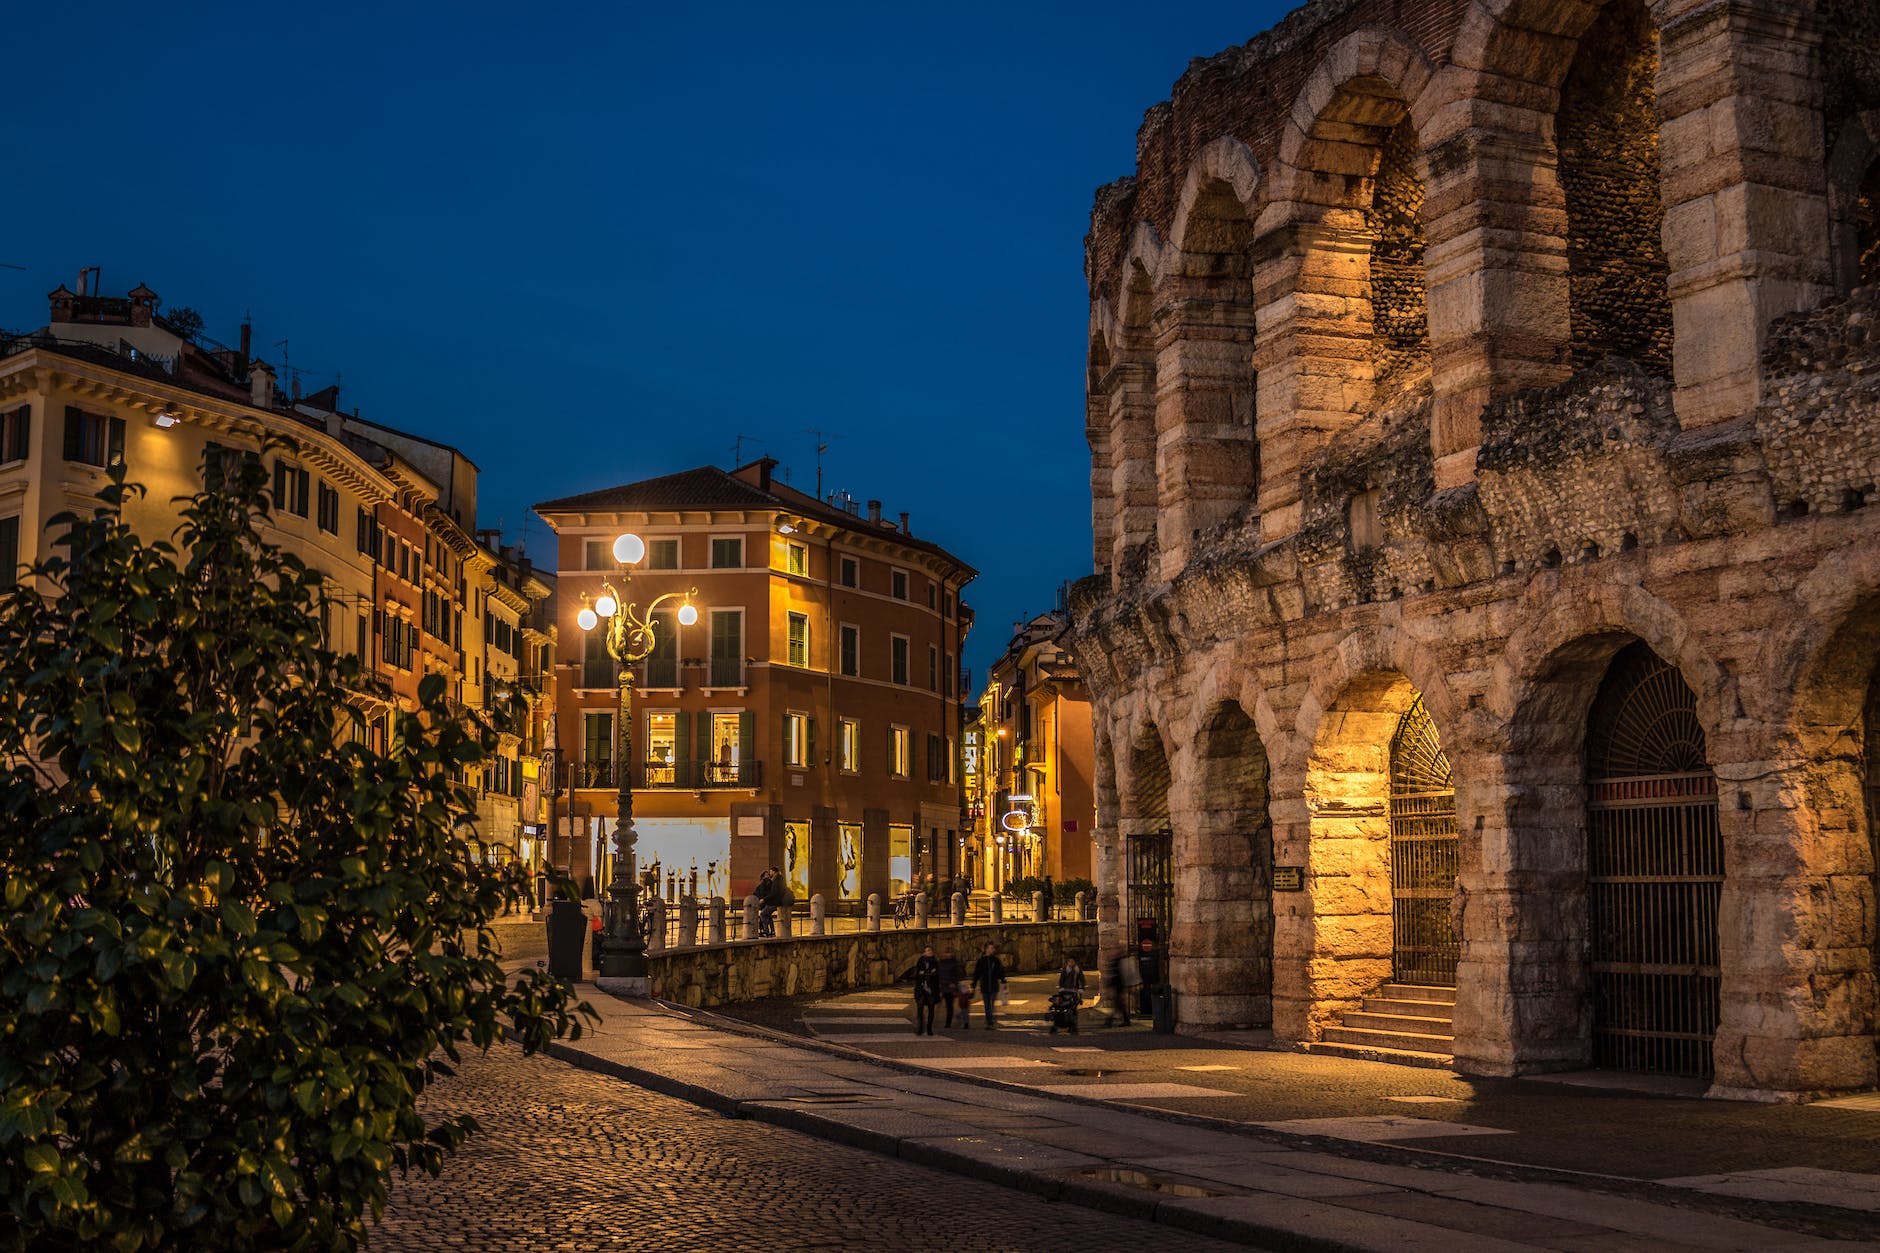 street with ancient buildings in verona italy